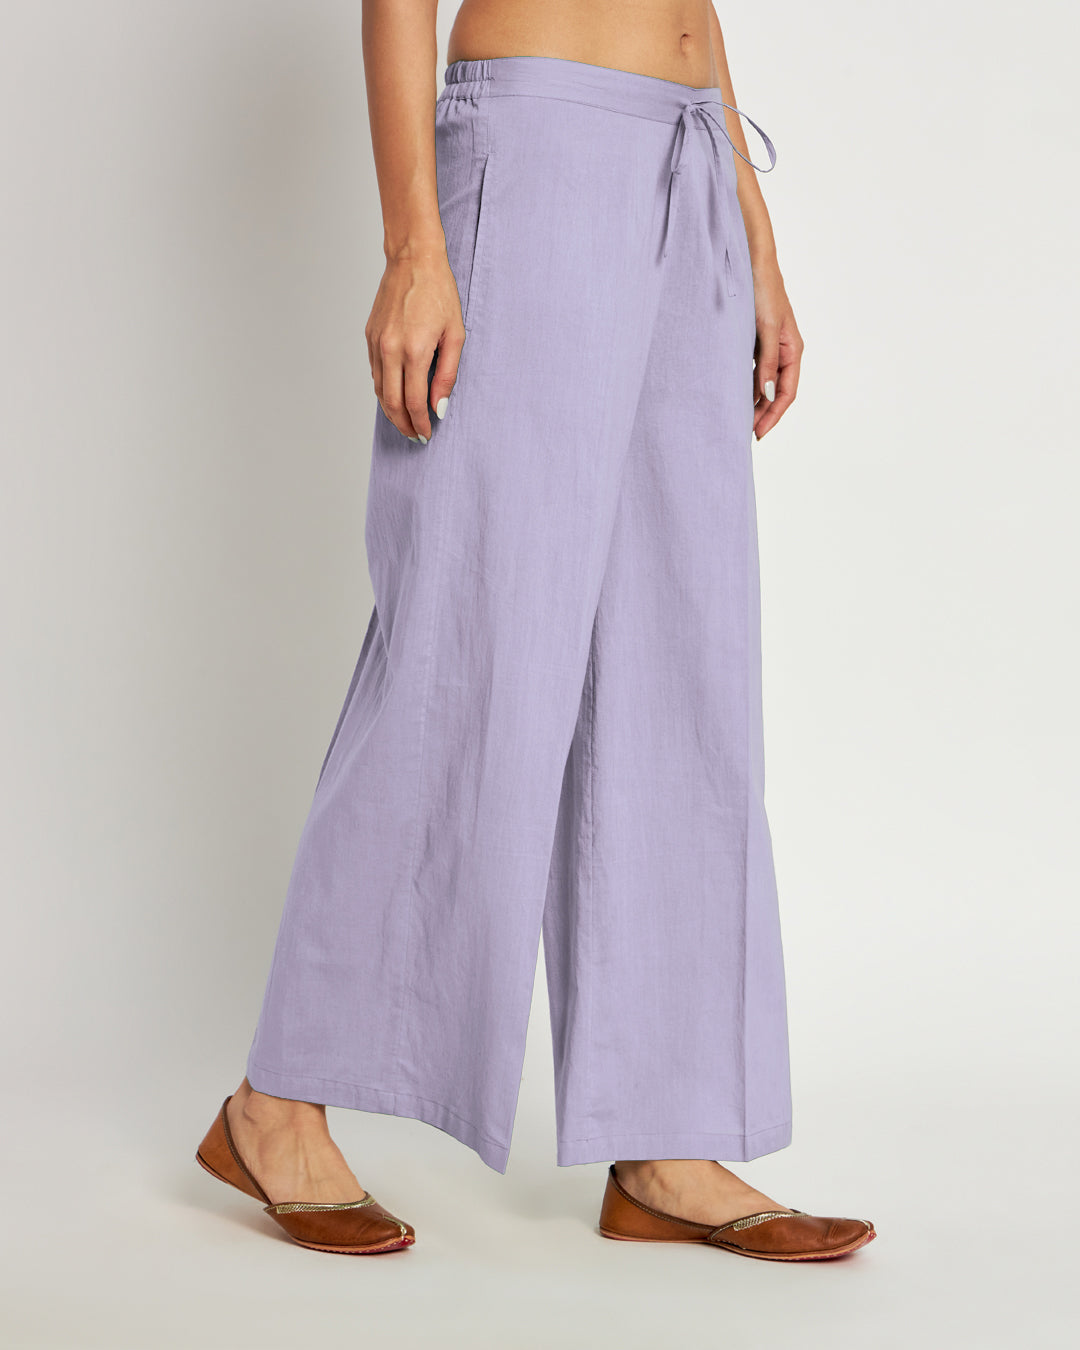 Combo: Russet Red & Lilac Wide Pants- Set Of 2